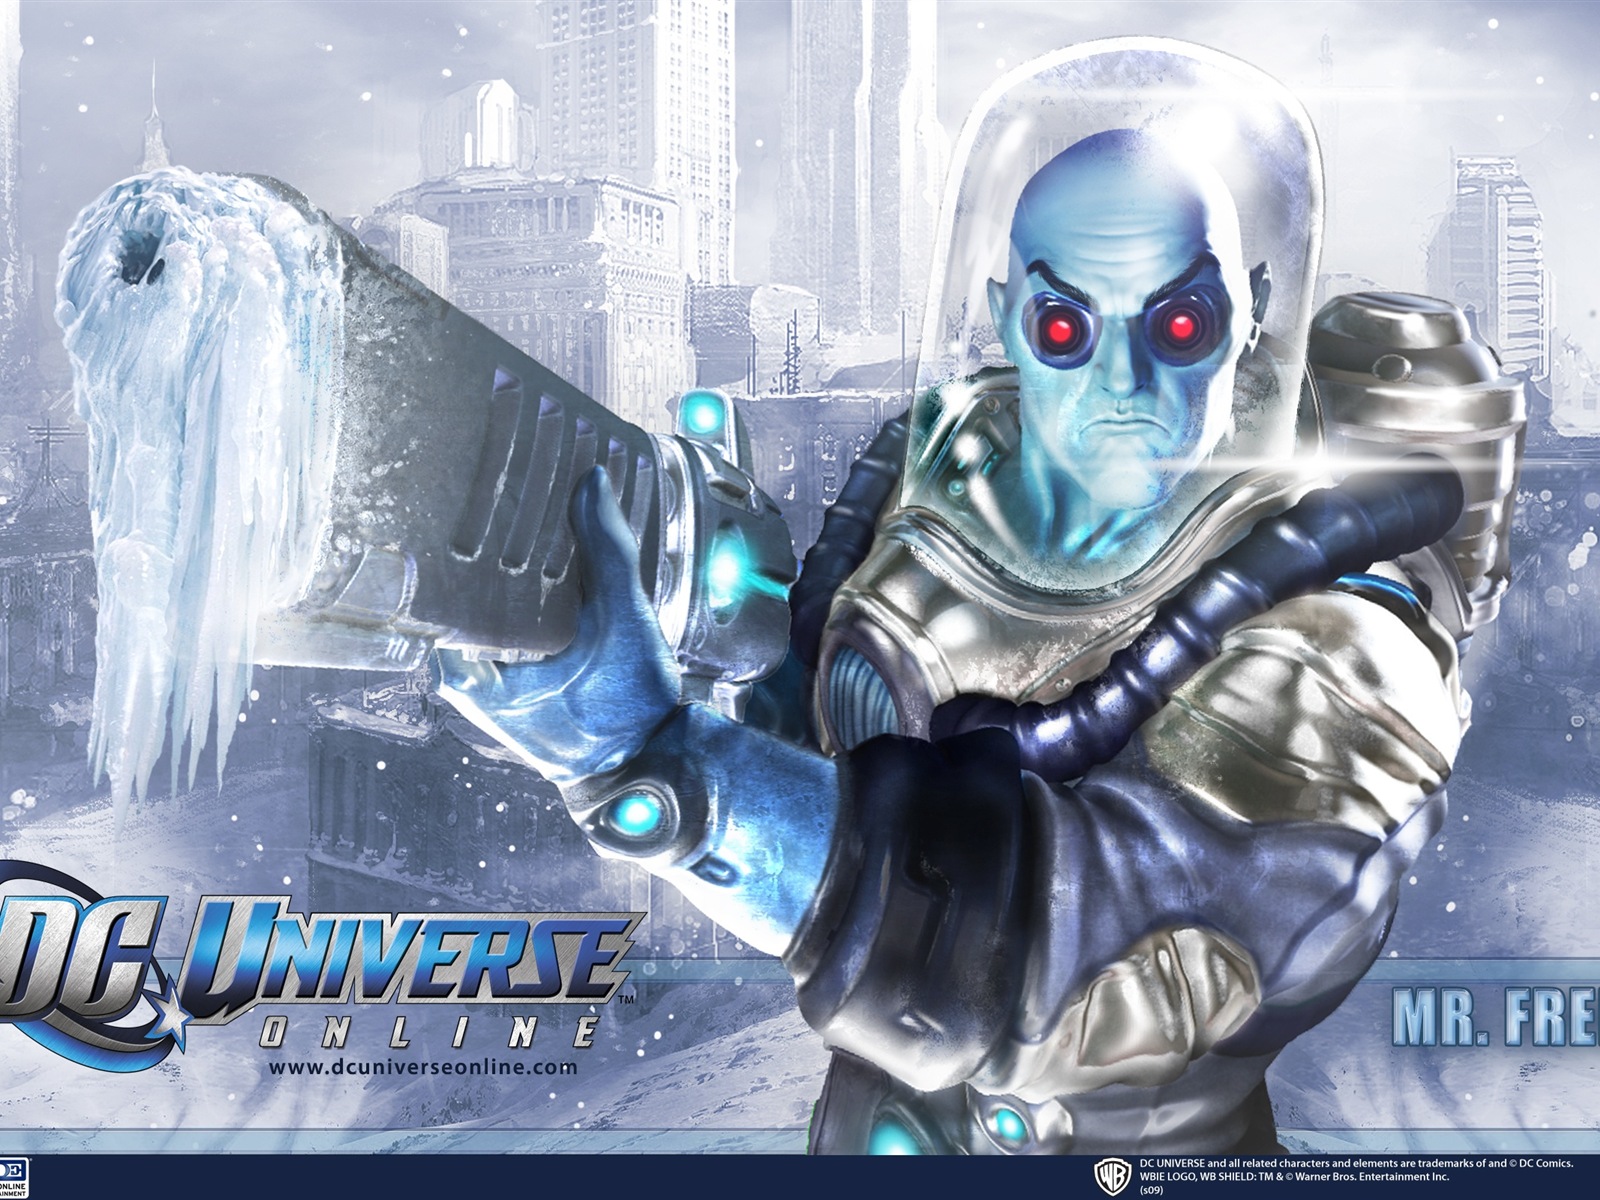 DC Universe Online HD game wallpapers #20 - 1600x1200